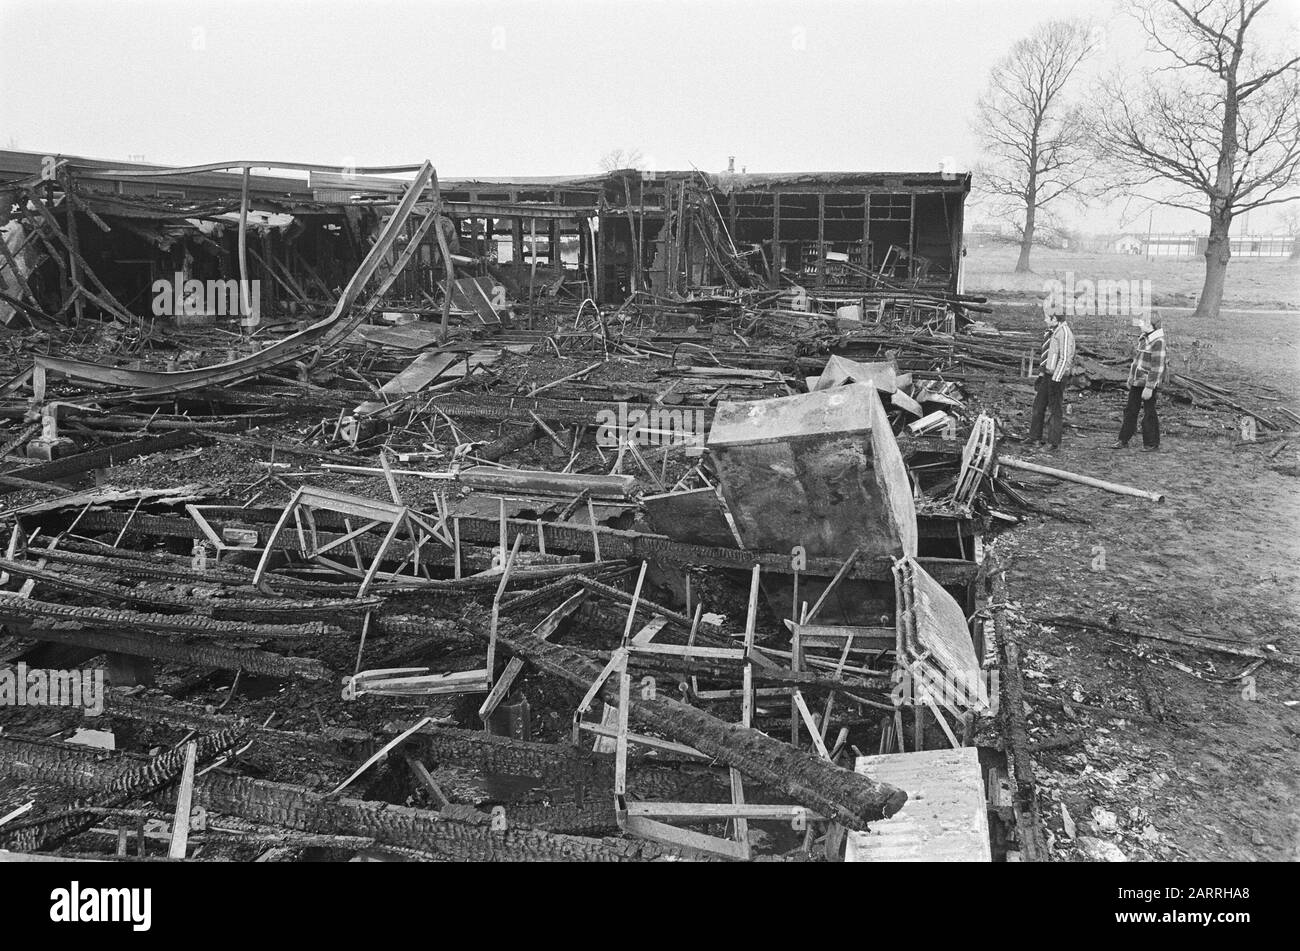 Burned down school Black and White Stock Photos & Images - Alamy